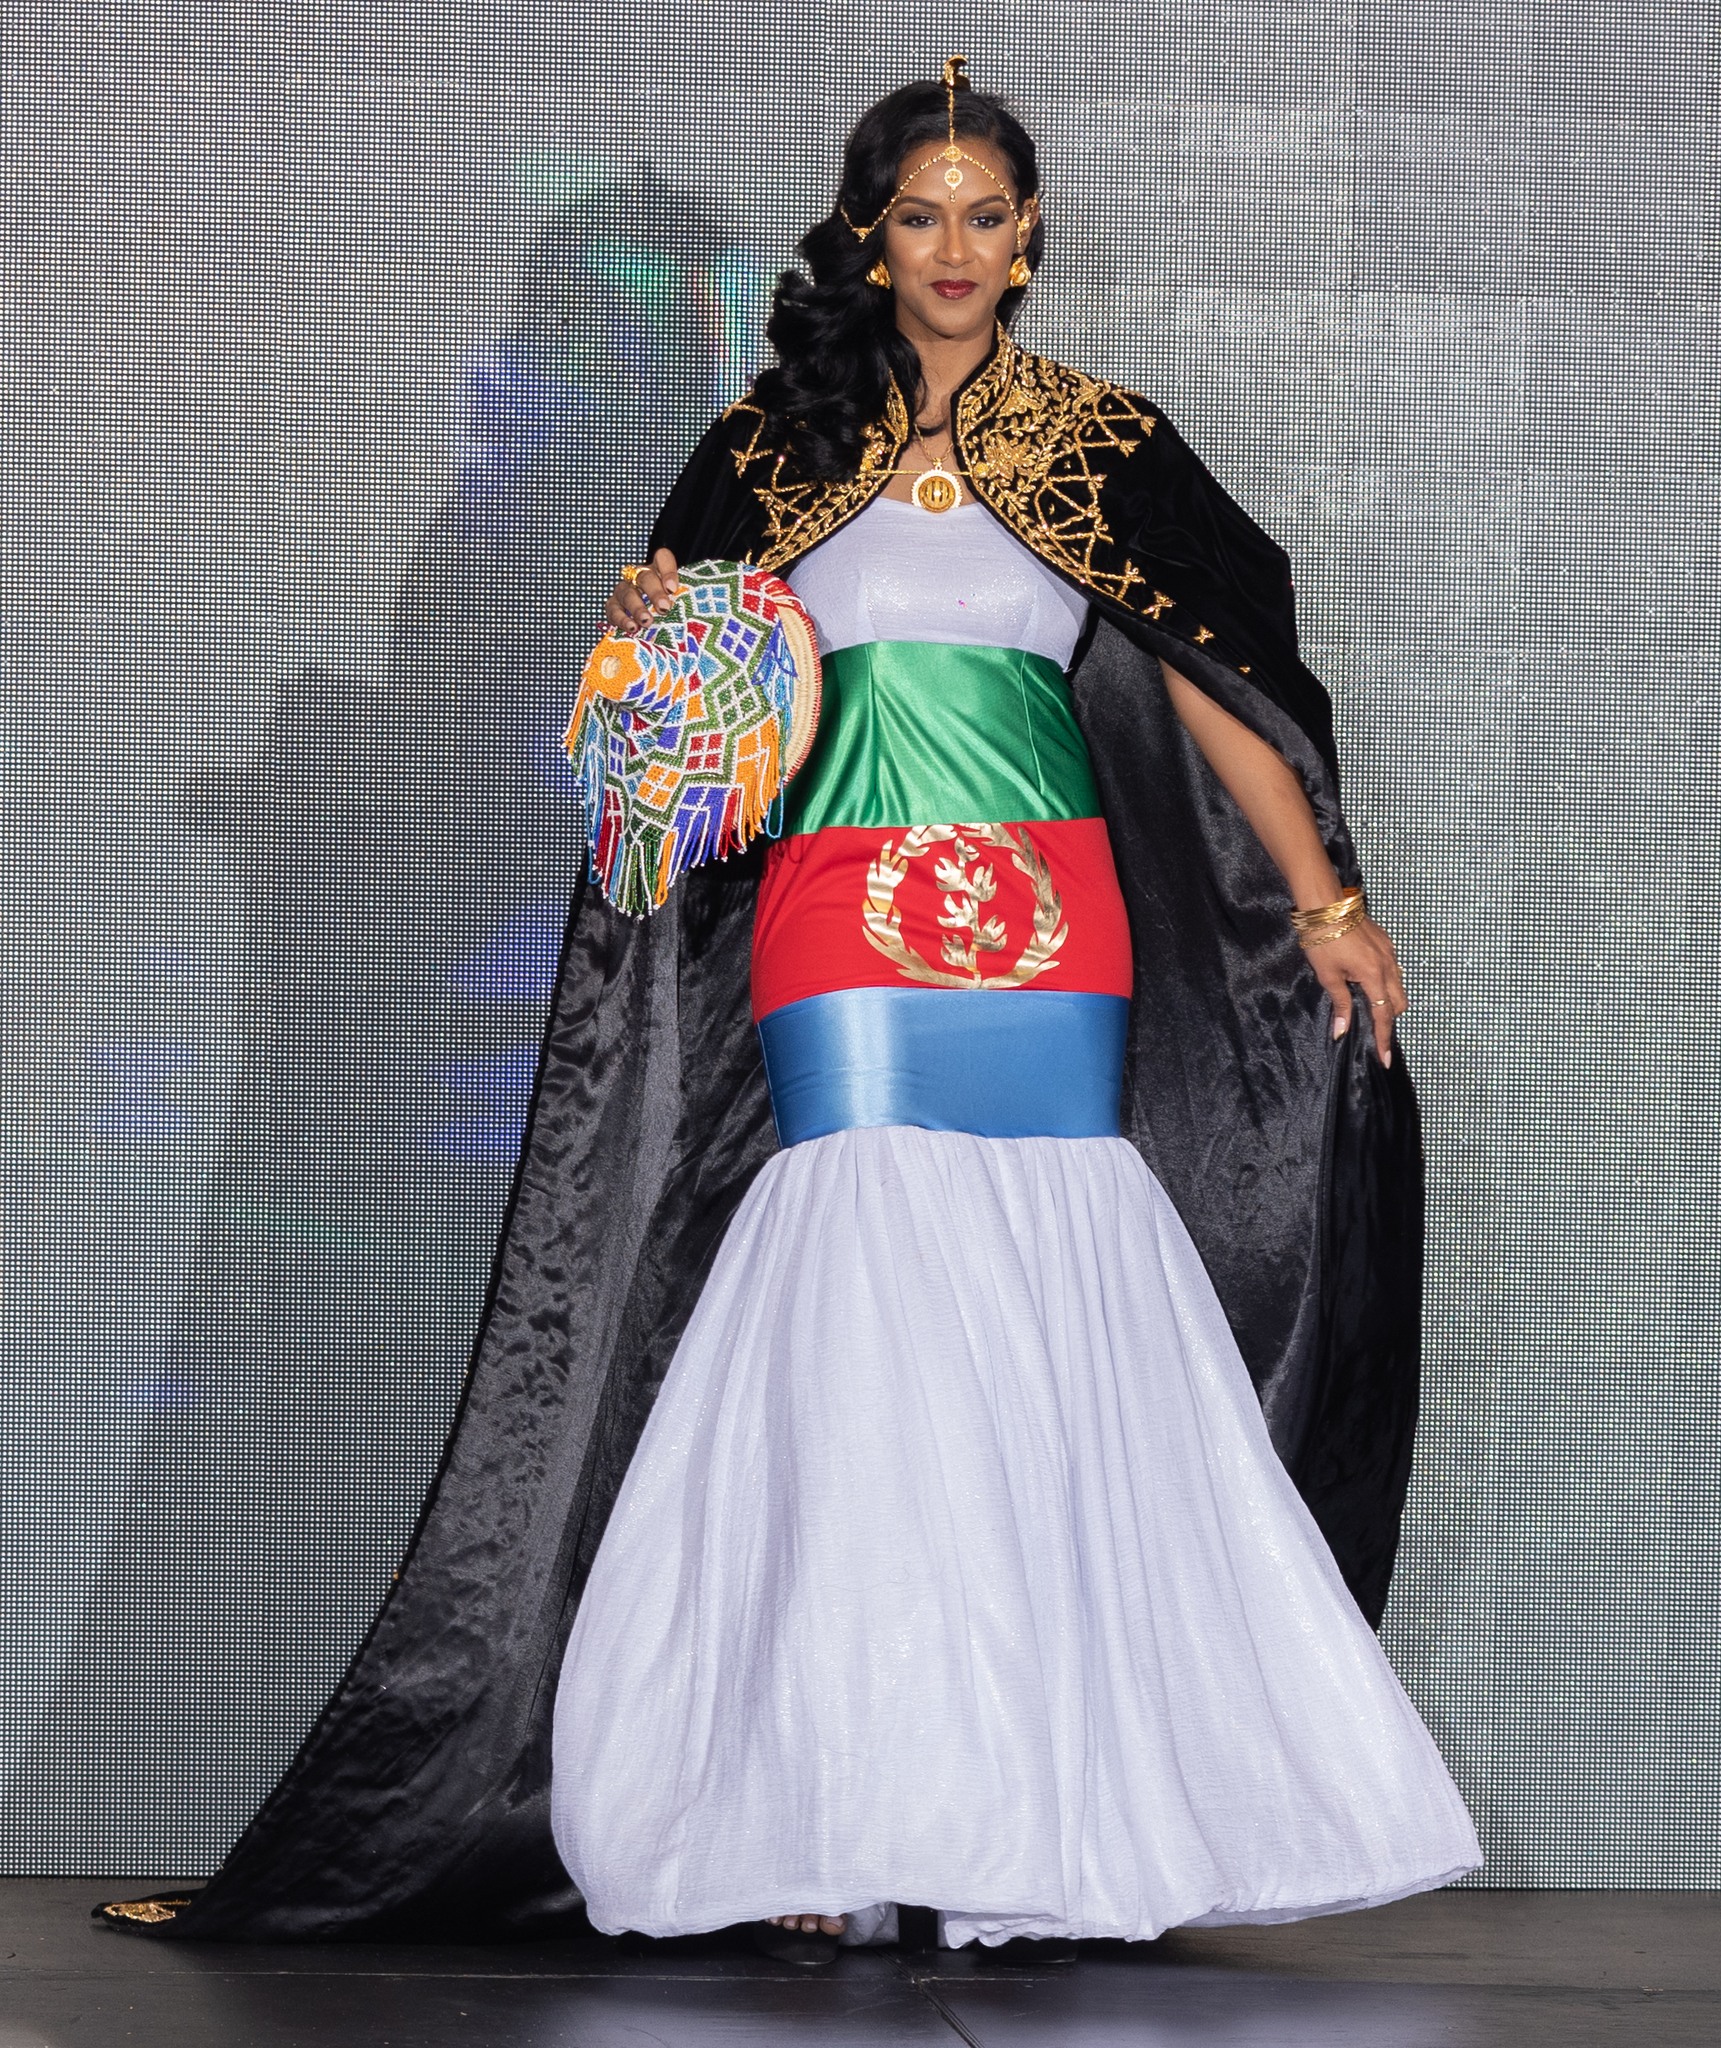 Read more about the article Showcasing African Fashion at Miss Africa USA Pageant